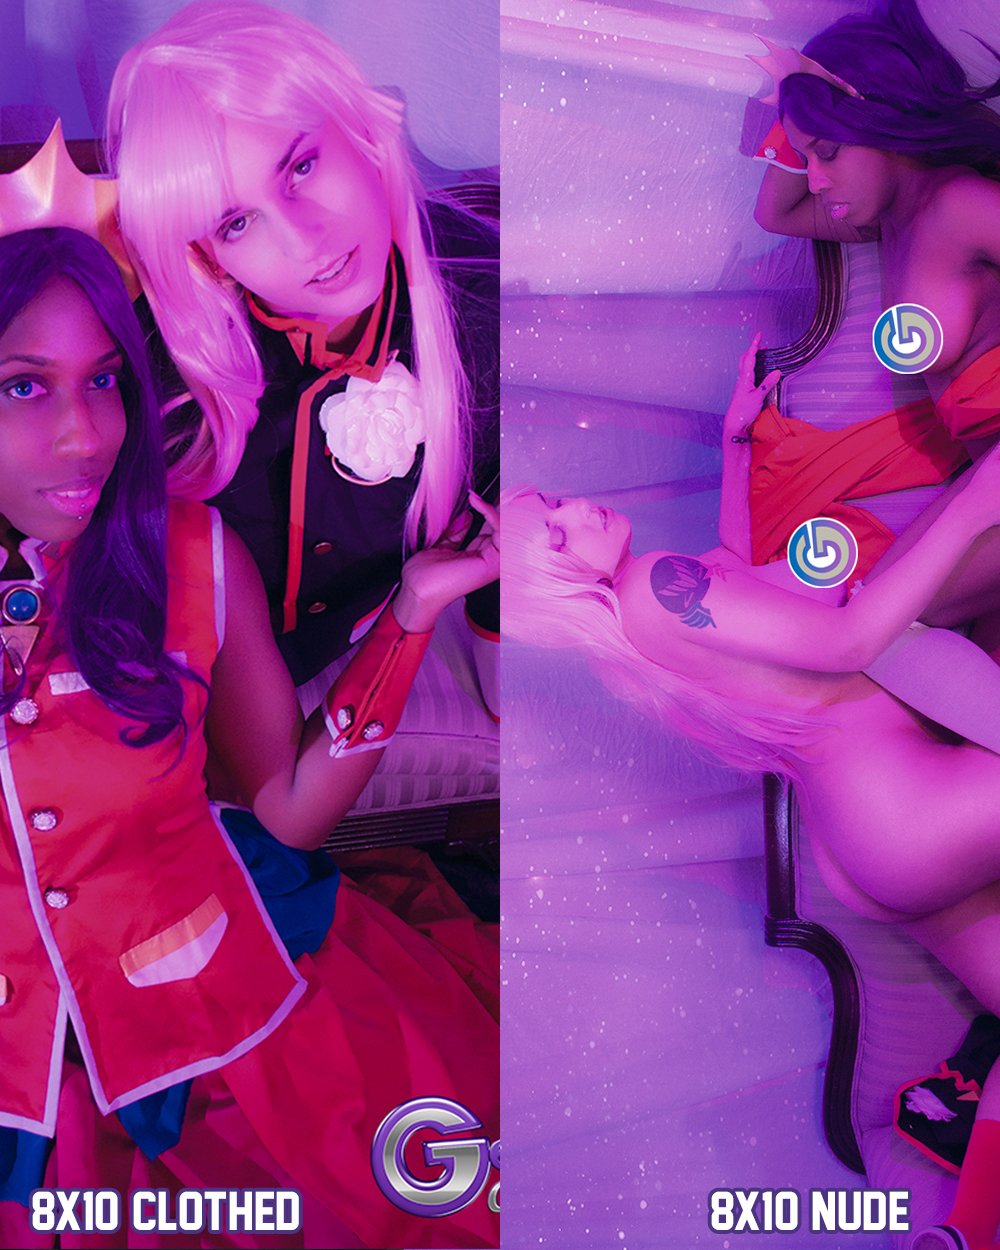 Alice Malice and Katrea Lux Prints from the Set "Her Prince"